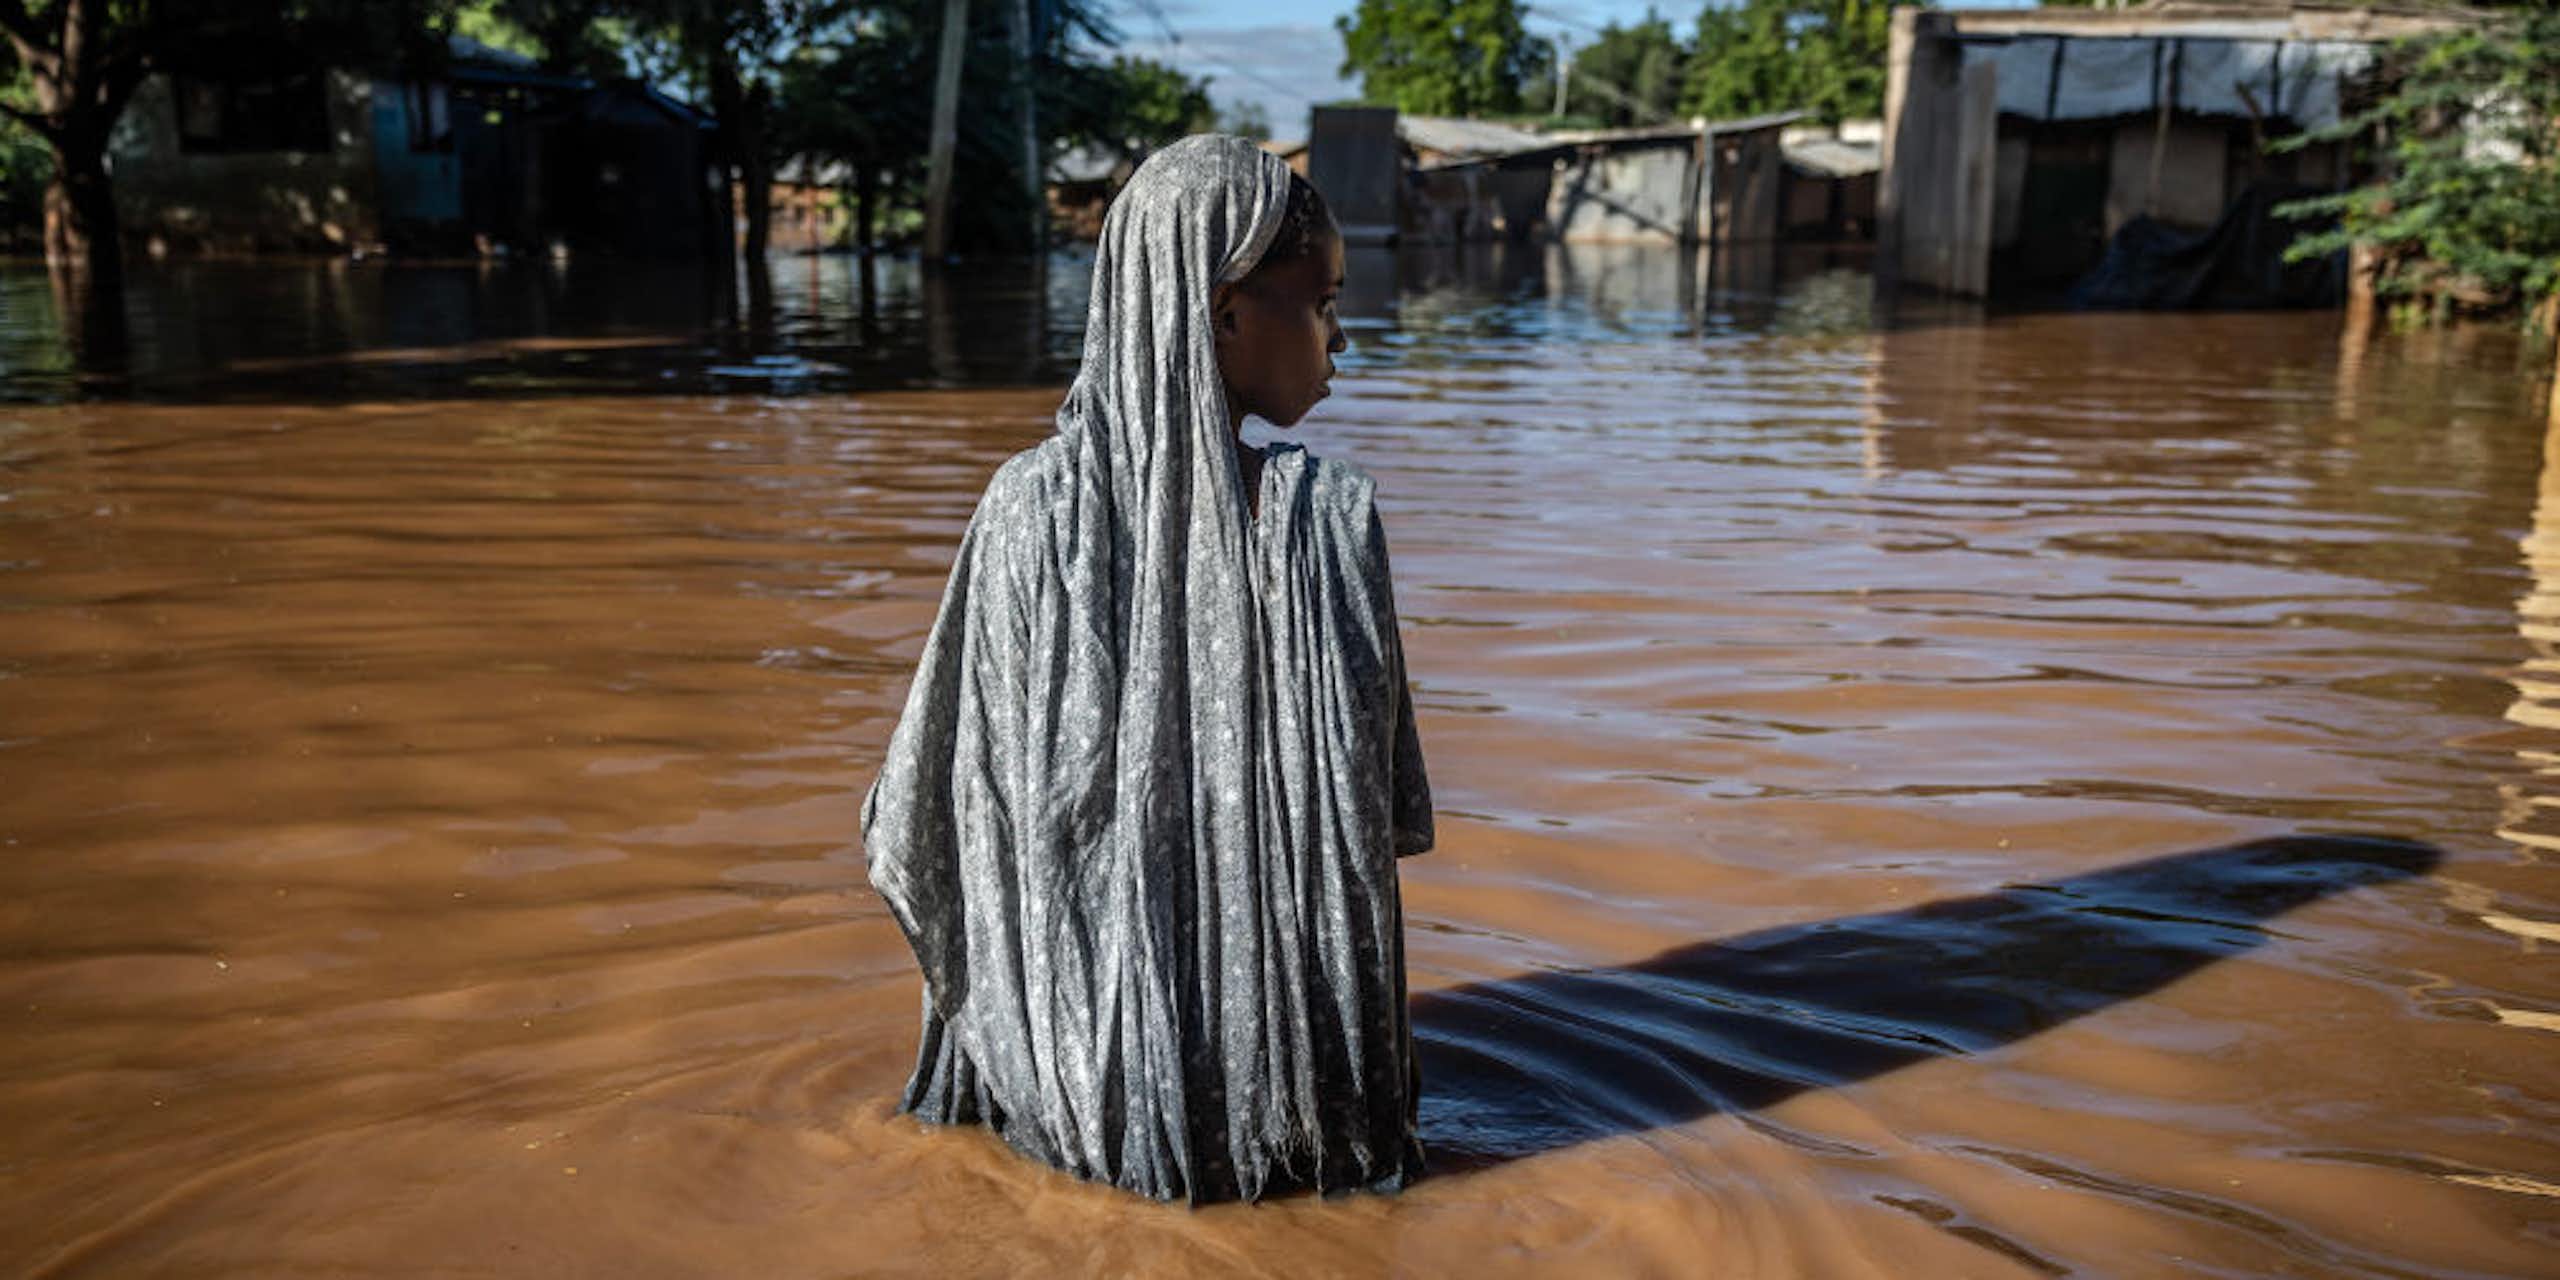 A solitary woman surrounded by waist deep flood water in flood waters look to one side.